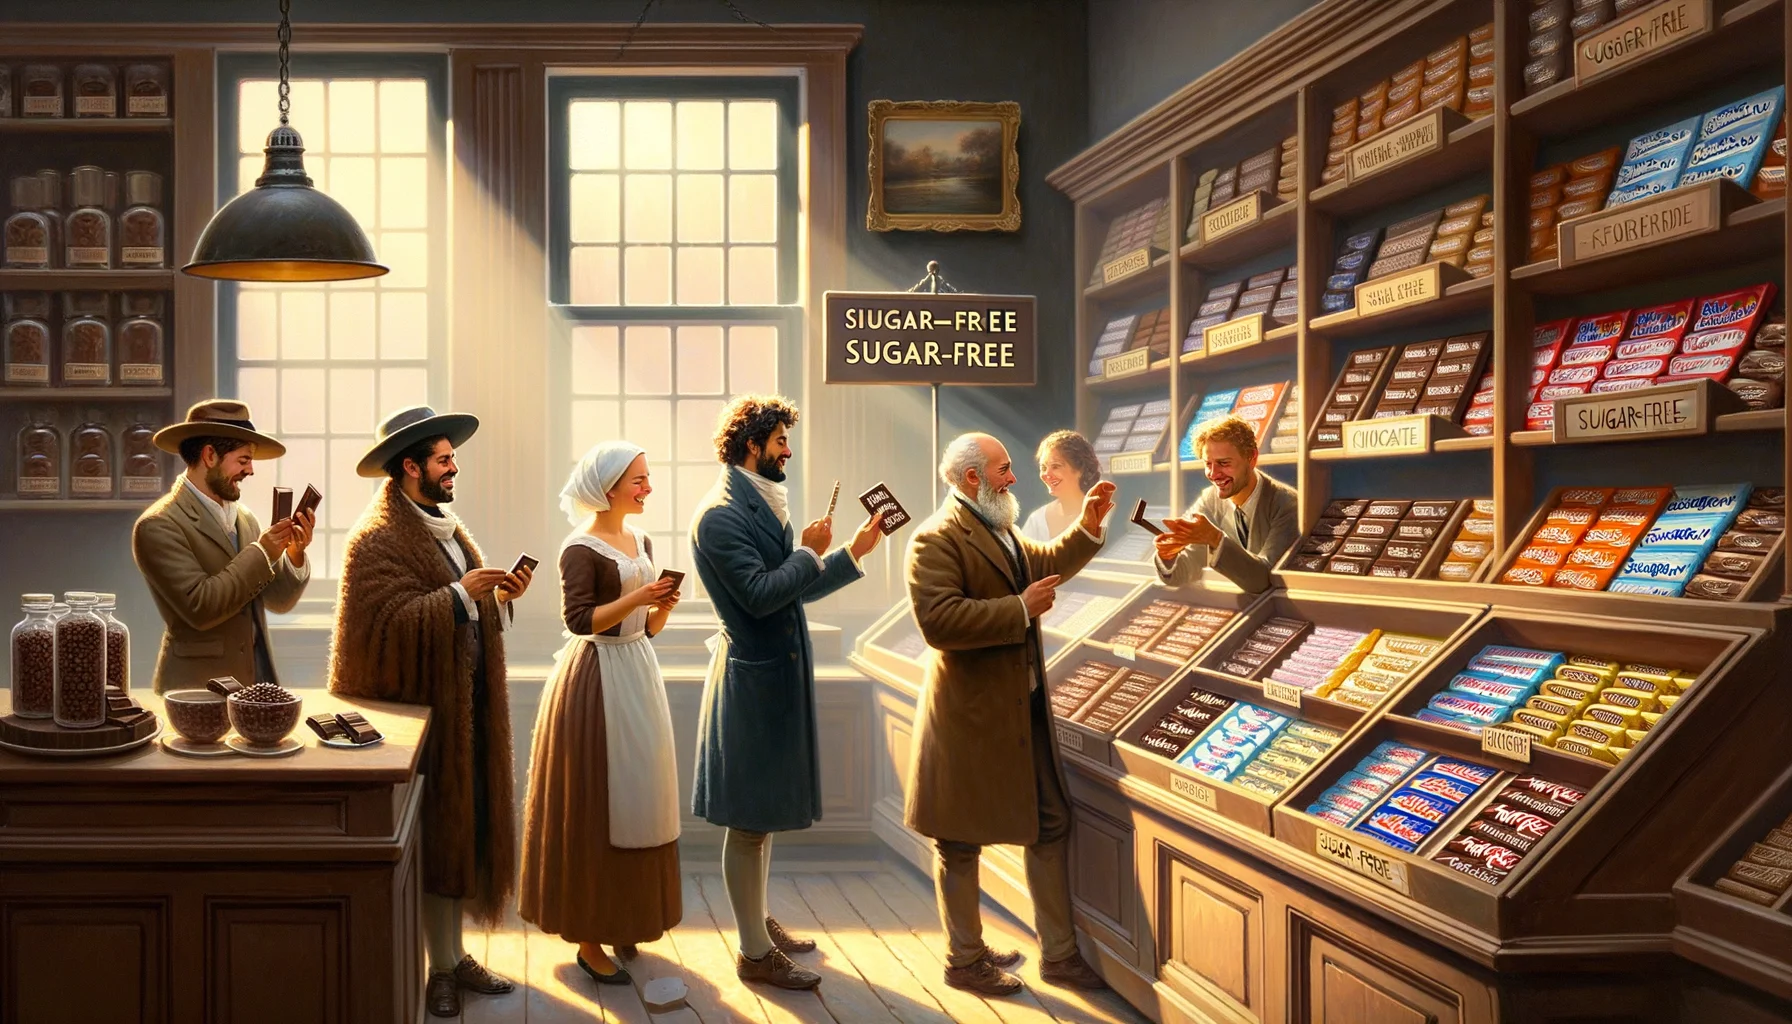 Create a witty and poignant scene that encapsulates the essence of locating the finest sugar-free chocolate bars. Envision a cozy Chocolate Shop, with shelf upon shelf of various chocolates of different shapes and sizes. Focus on one specific shelf labeled 'Sugar-Free', which is highlighted by a beam of sunlight pouring in through a nearby window. On the counter, are four customers, two men, one of South Asian and another of Middle Eastern descent, and two women, one Caucasian and another Hispanic. Each holds a different bar, examining the packaging with satisfaction. Their facial expressions are of pleasant surprise, and they talk animatedly about their sweet discovery. Original artwork, classic Dutch Baroque style. Medium: oil on canvas.